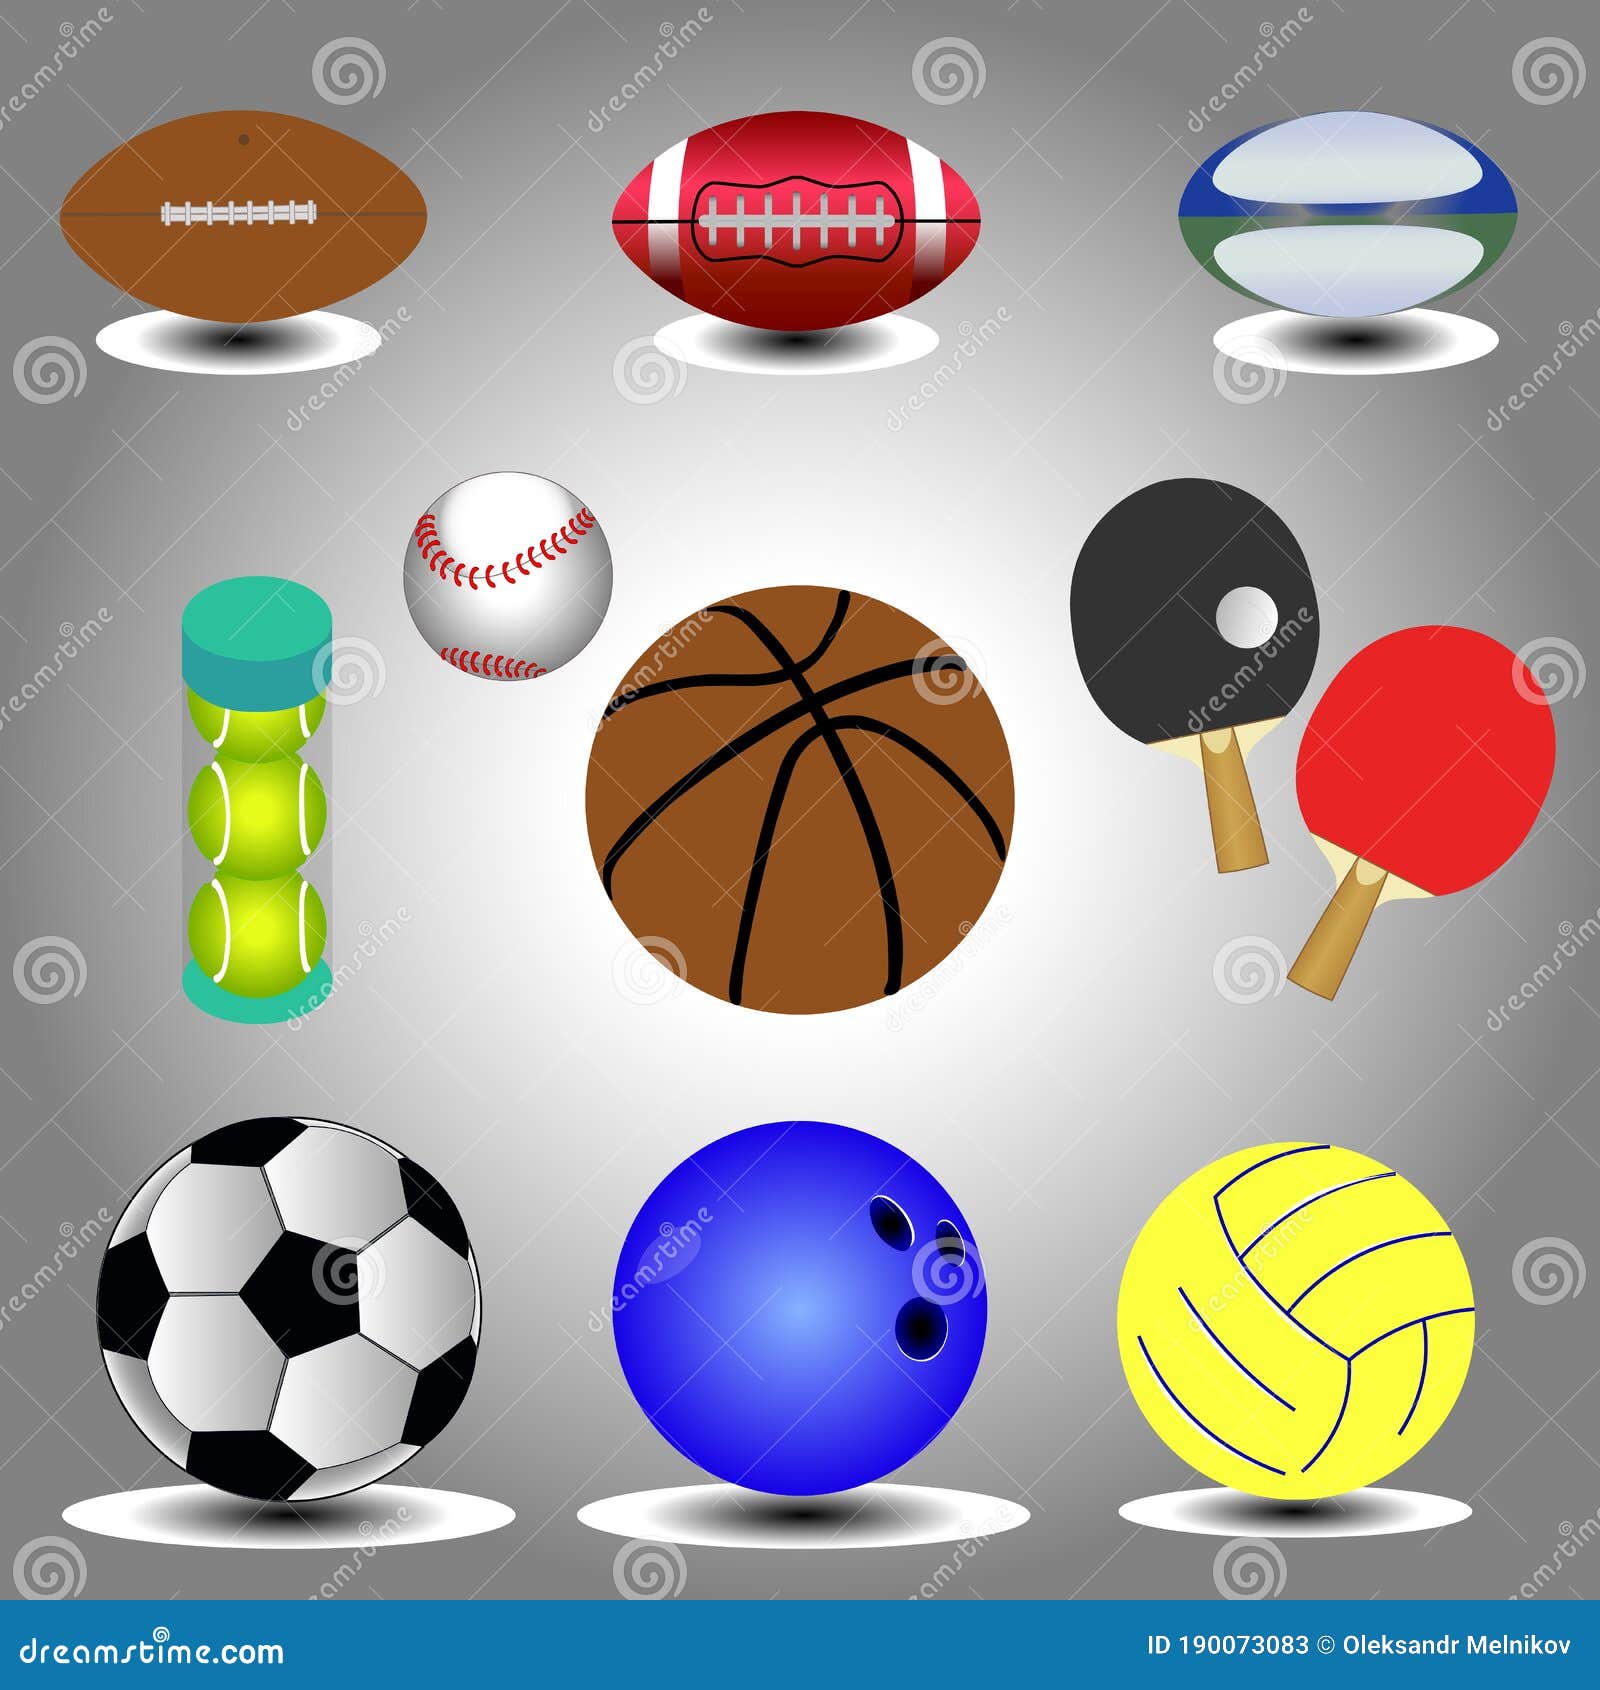 Set Of Balls For Different Sports Sing For Example Soker Soccer Tennis Bowling Volleyball Baseball Ping Pong And Bowling Stock Vector Illustration Of Baseball Competitive